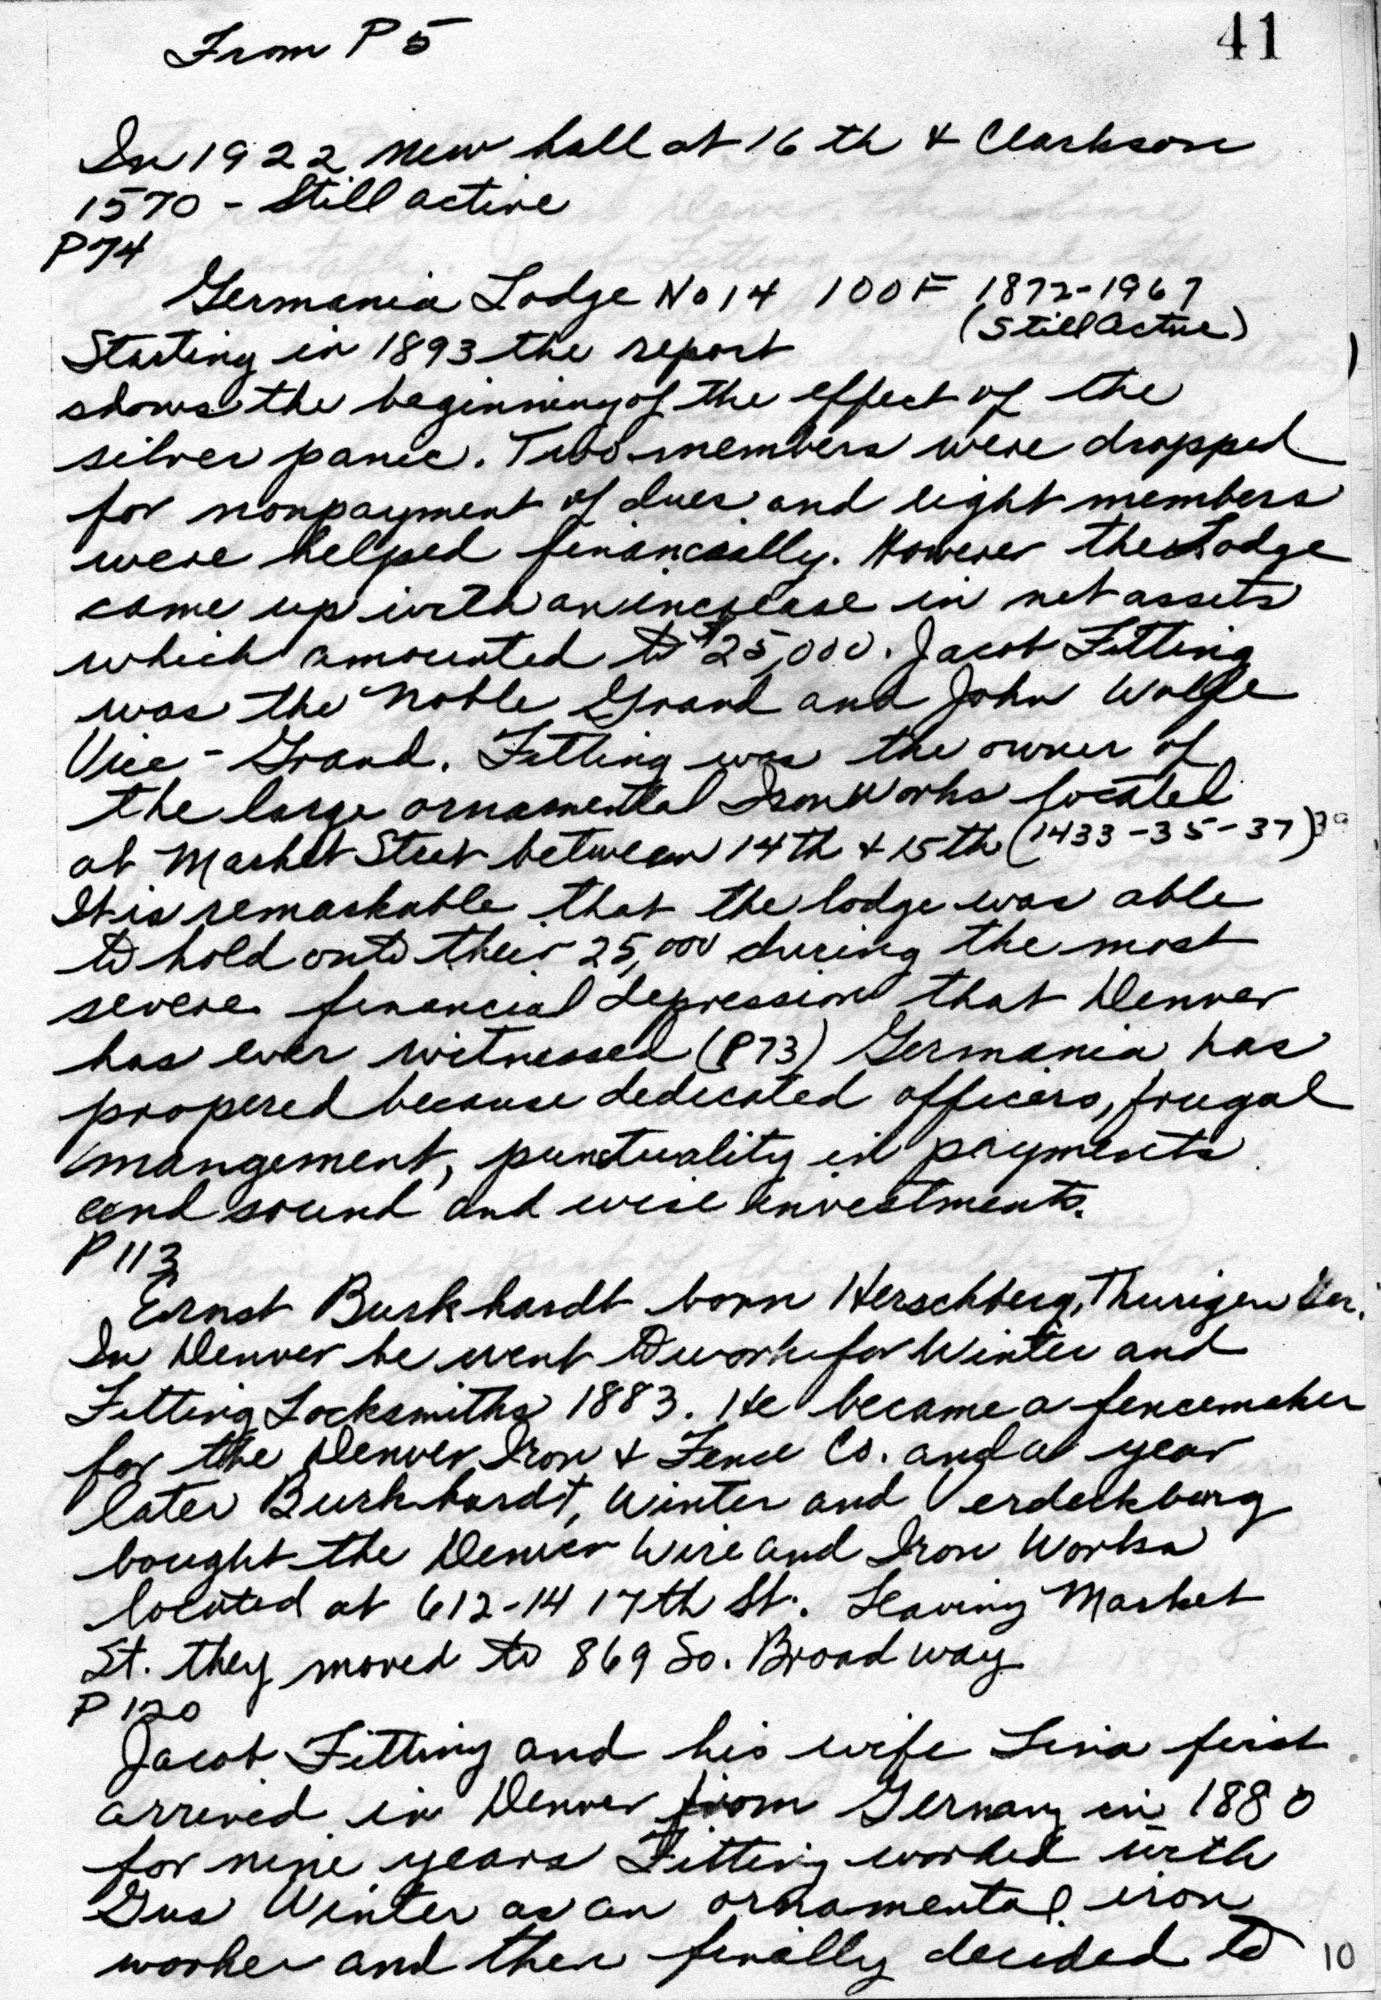 Dauth Family Archive - Elizabeth Fitting Family History Page 10